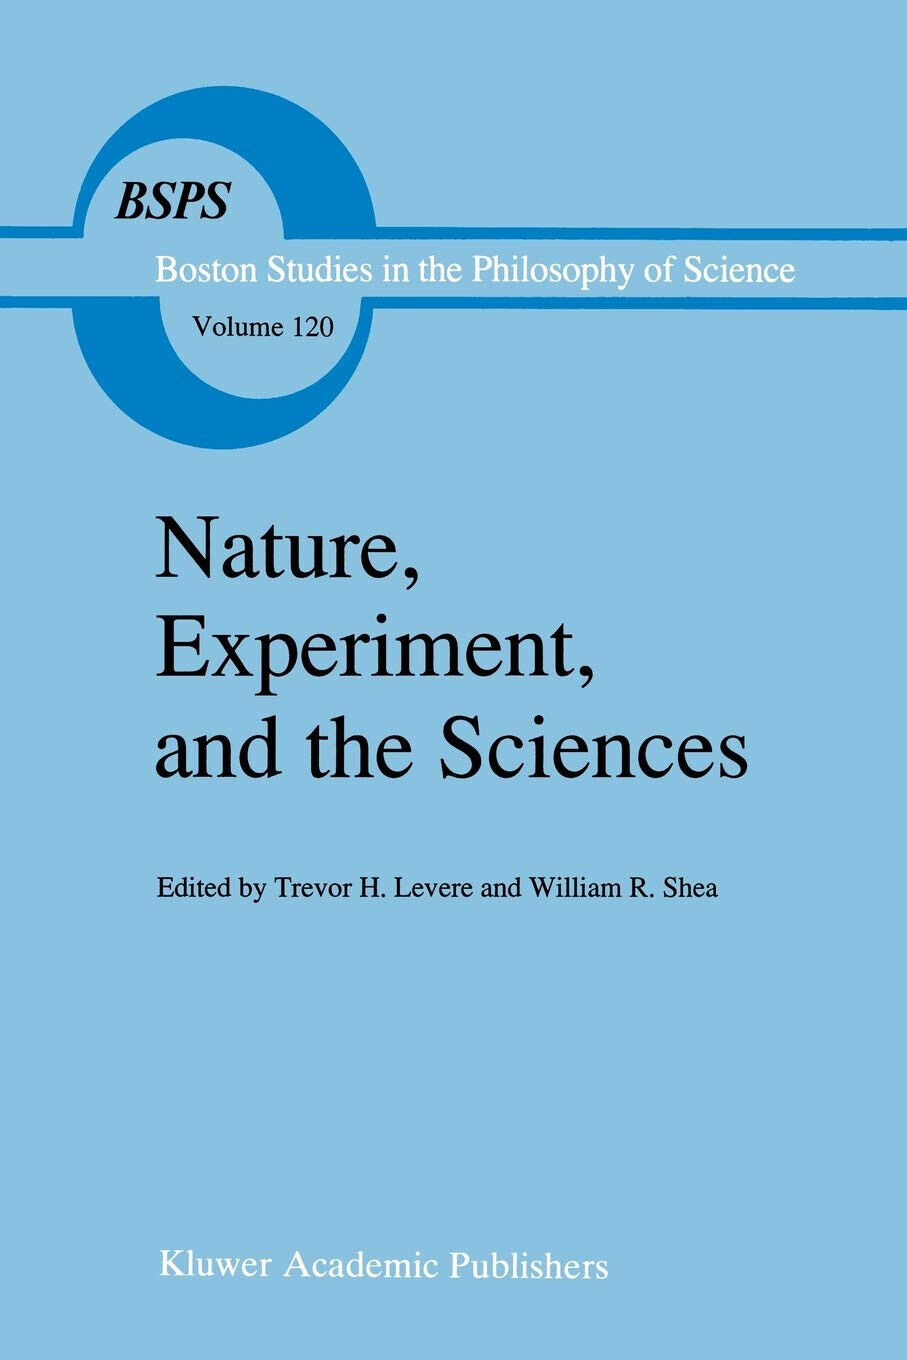 Nature, Experiment, and the Sciences - Trevor H. Levere  - Springer, 2013